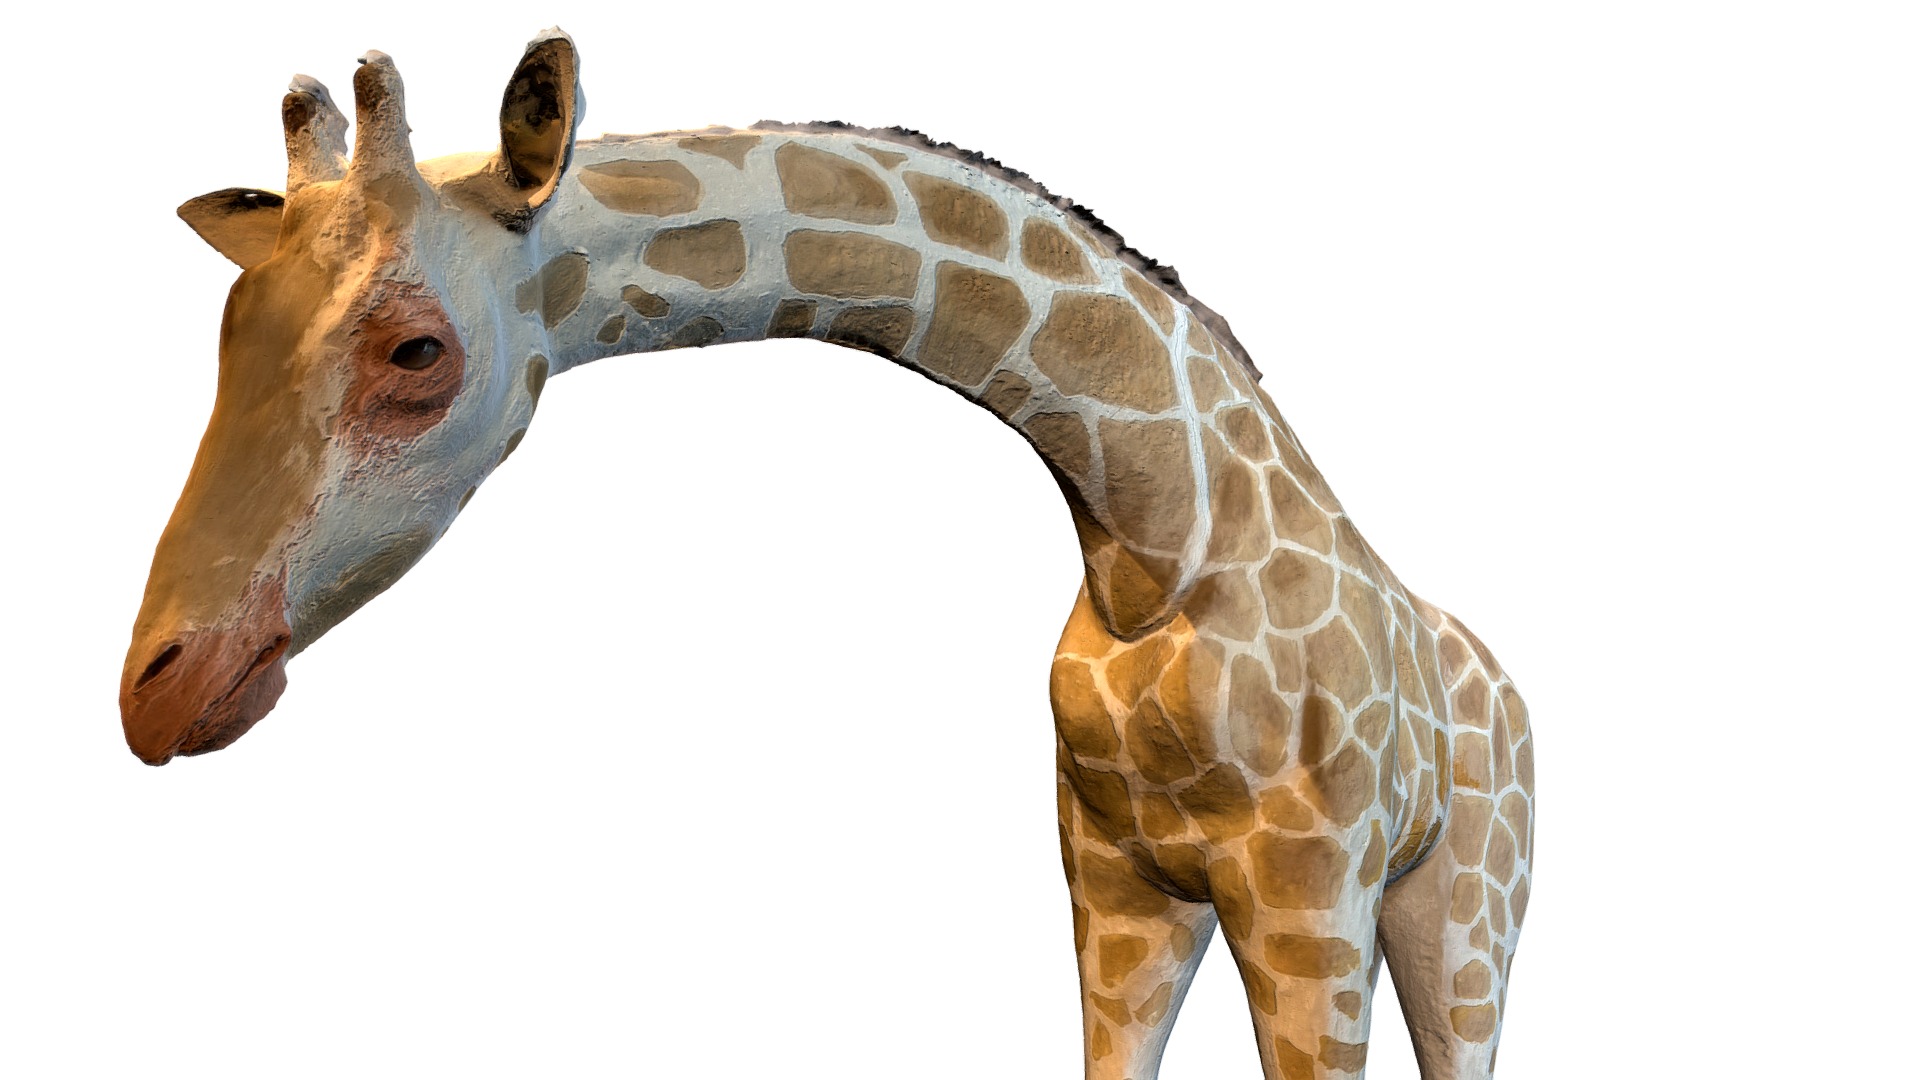 3D model Girafe - This is a 3D model of the Girafe. The 3D model is about a giraffe with its head tilted.